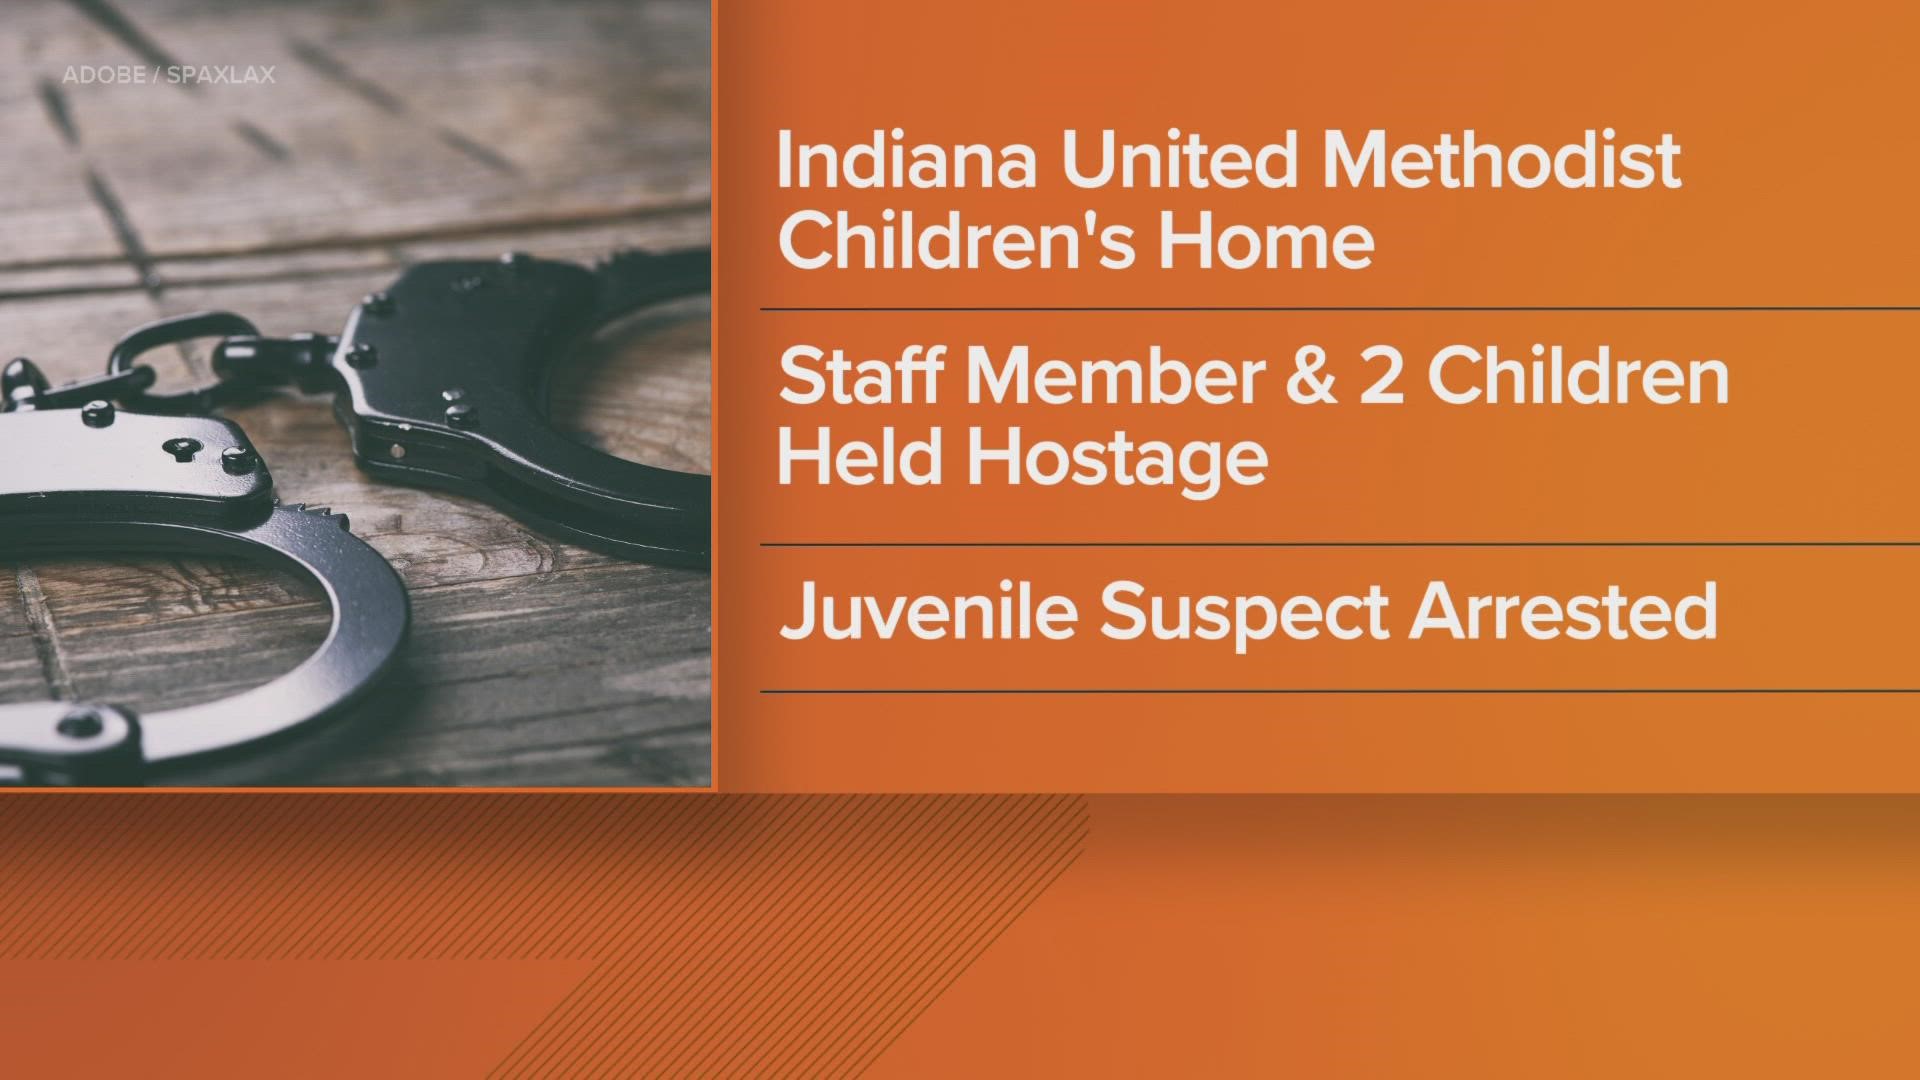 According to police, a juvenile had taken a staff member and two other juveniles hostage in an attempt to get to Indianapolis.